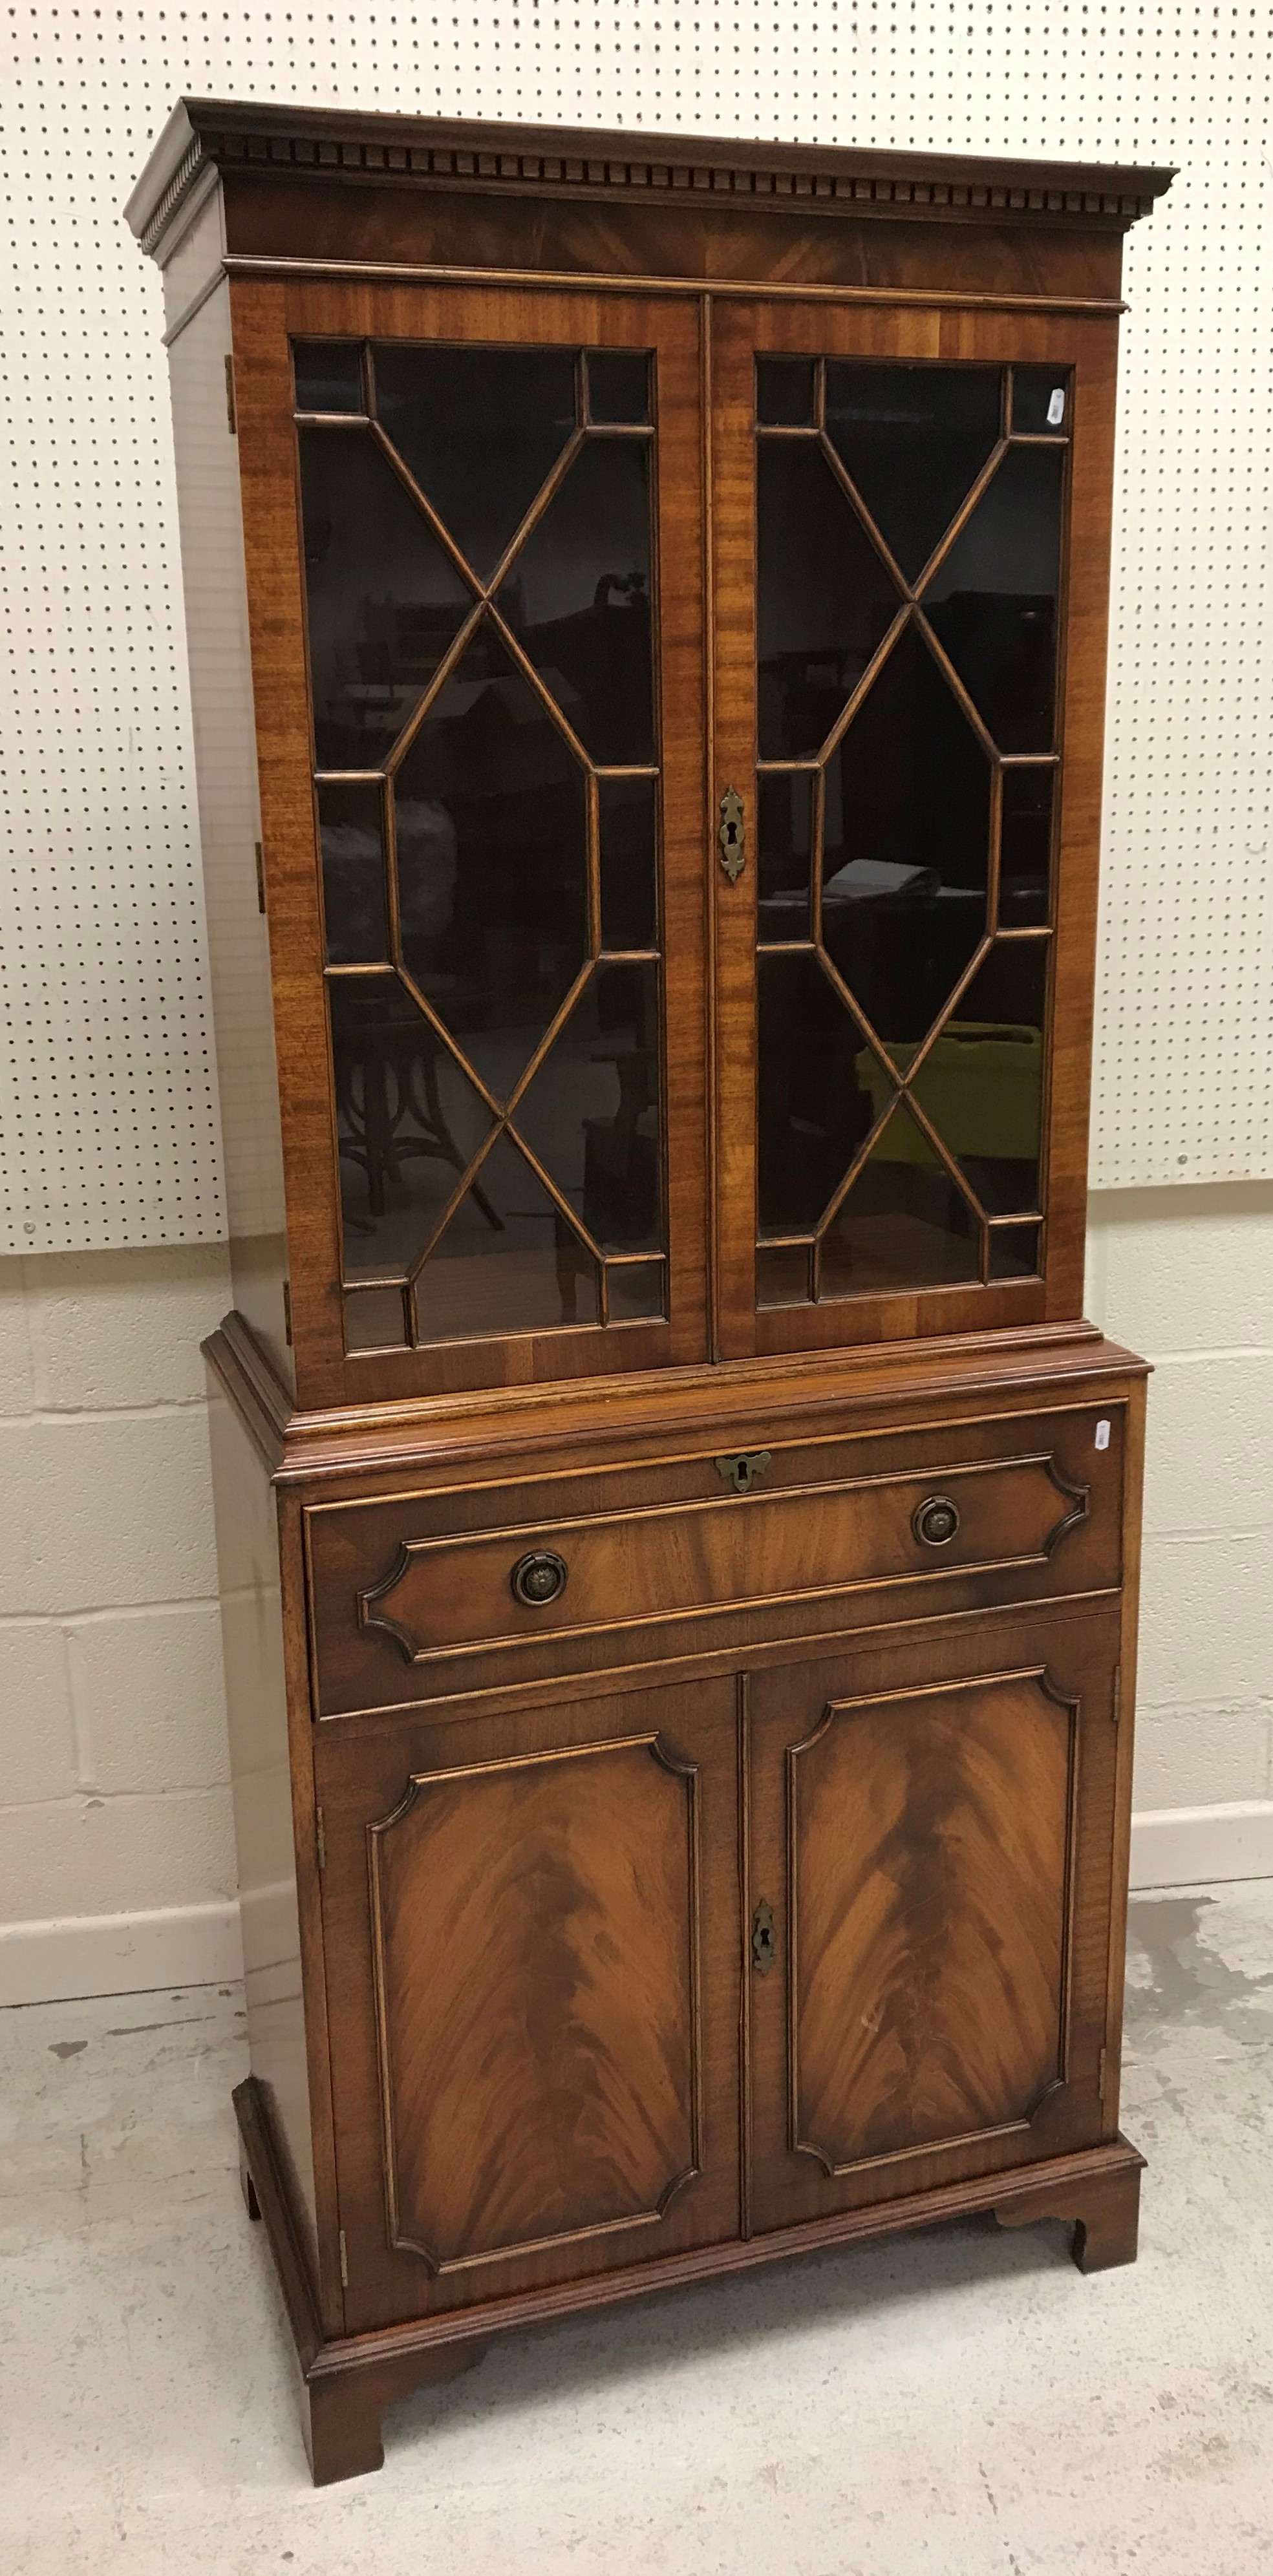 A Bevan Funnell Reprodux mahogany secretaire bookcase with two glazed doors over a fitted drawer